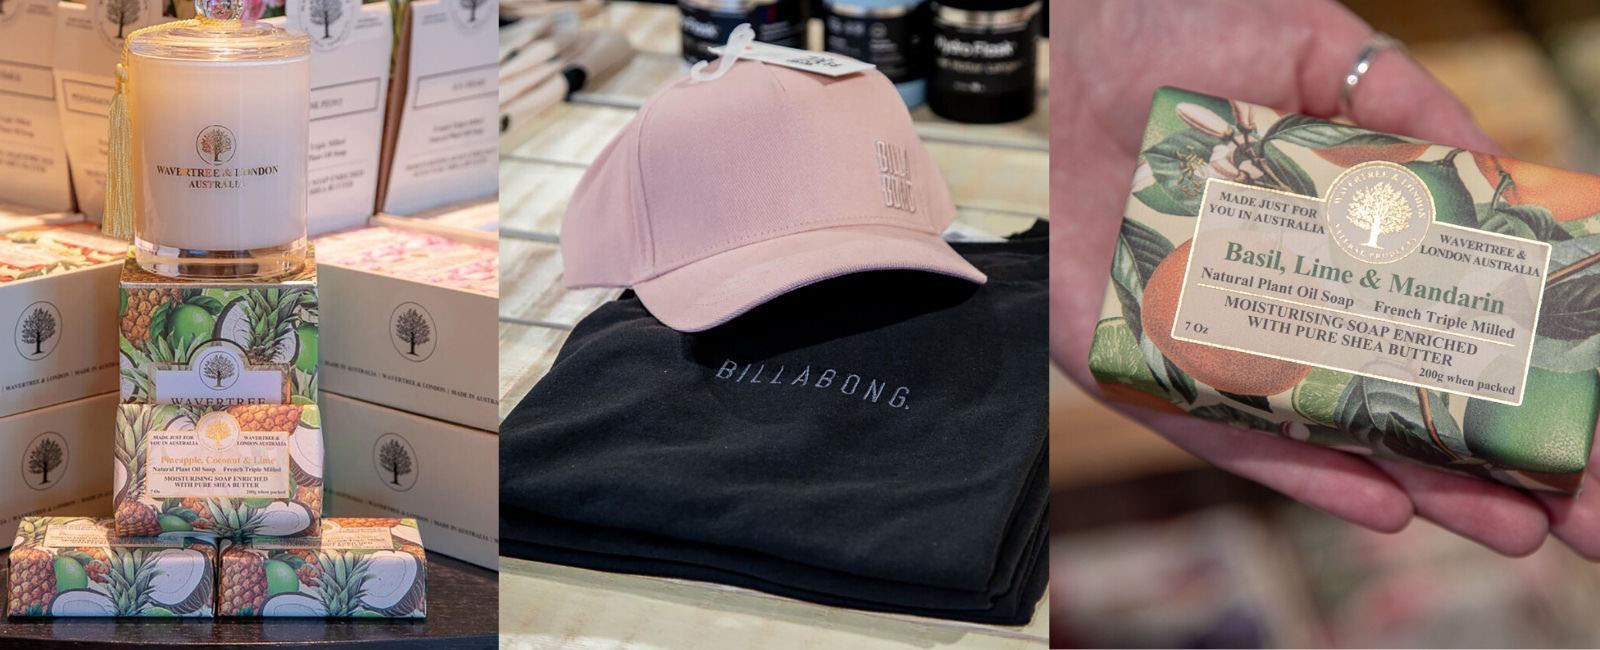 Gifts under $50 International Terminal Brisbane - Australian Produce Store, Billabong Store | Your ultimate Christmas gift guide: Where to buy gifts for all budgets at Brisbane Airport